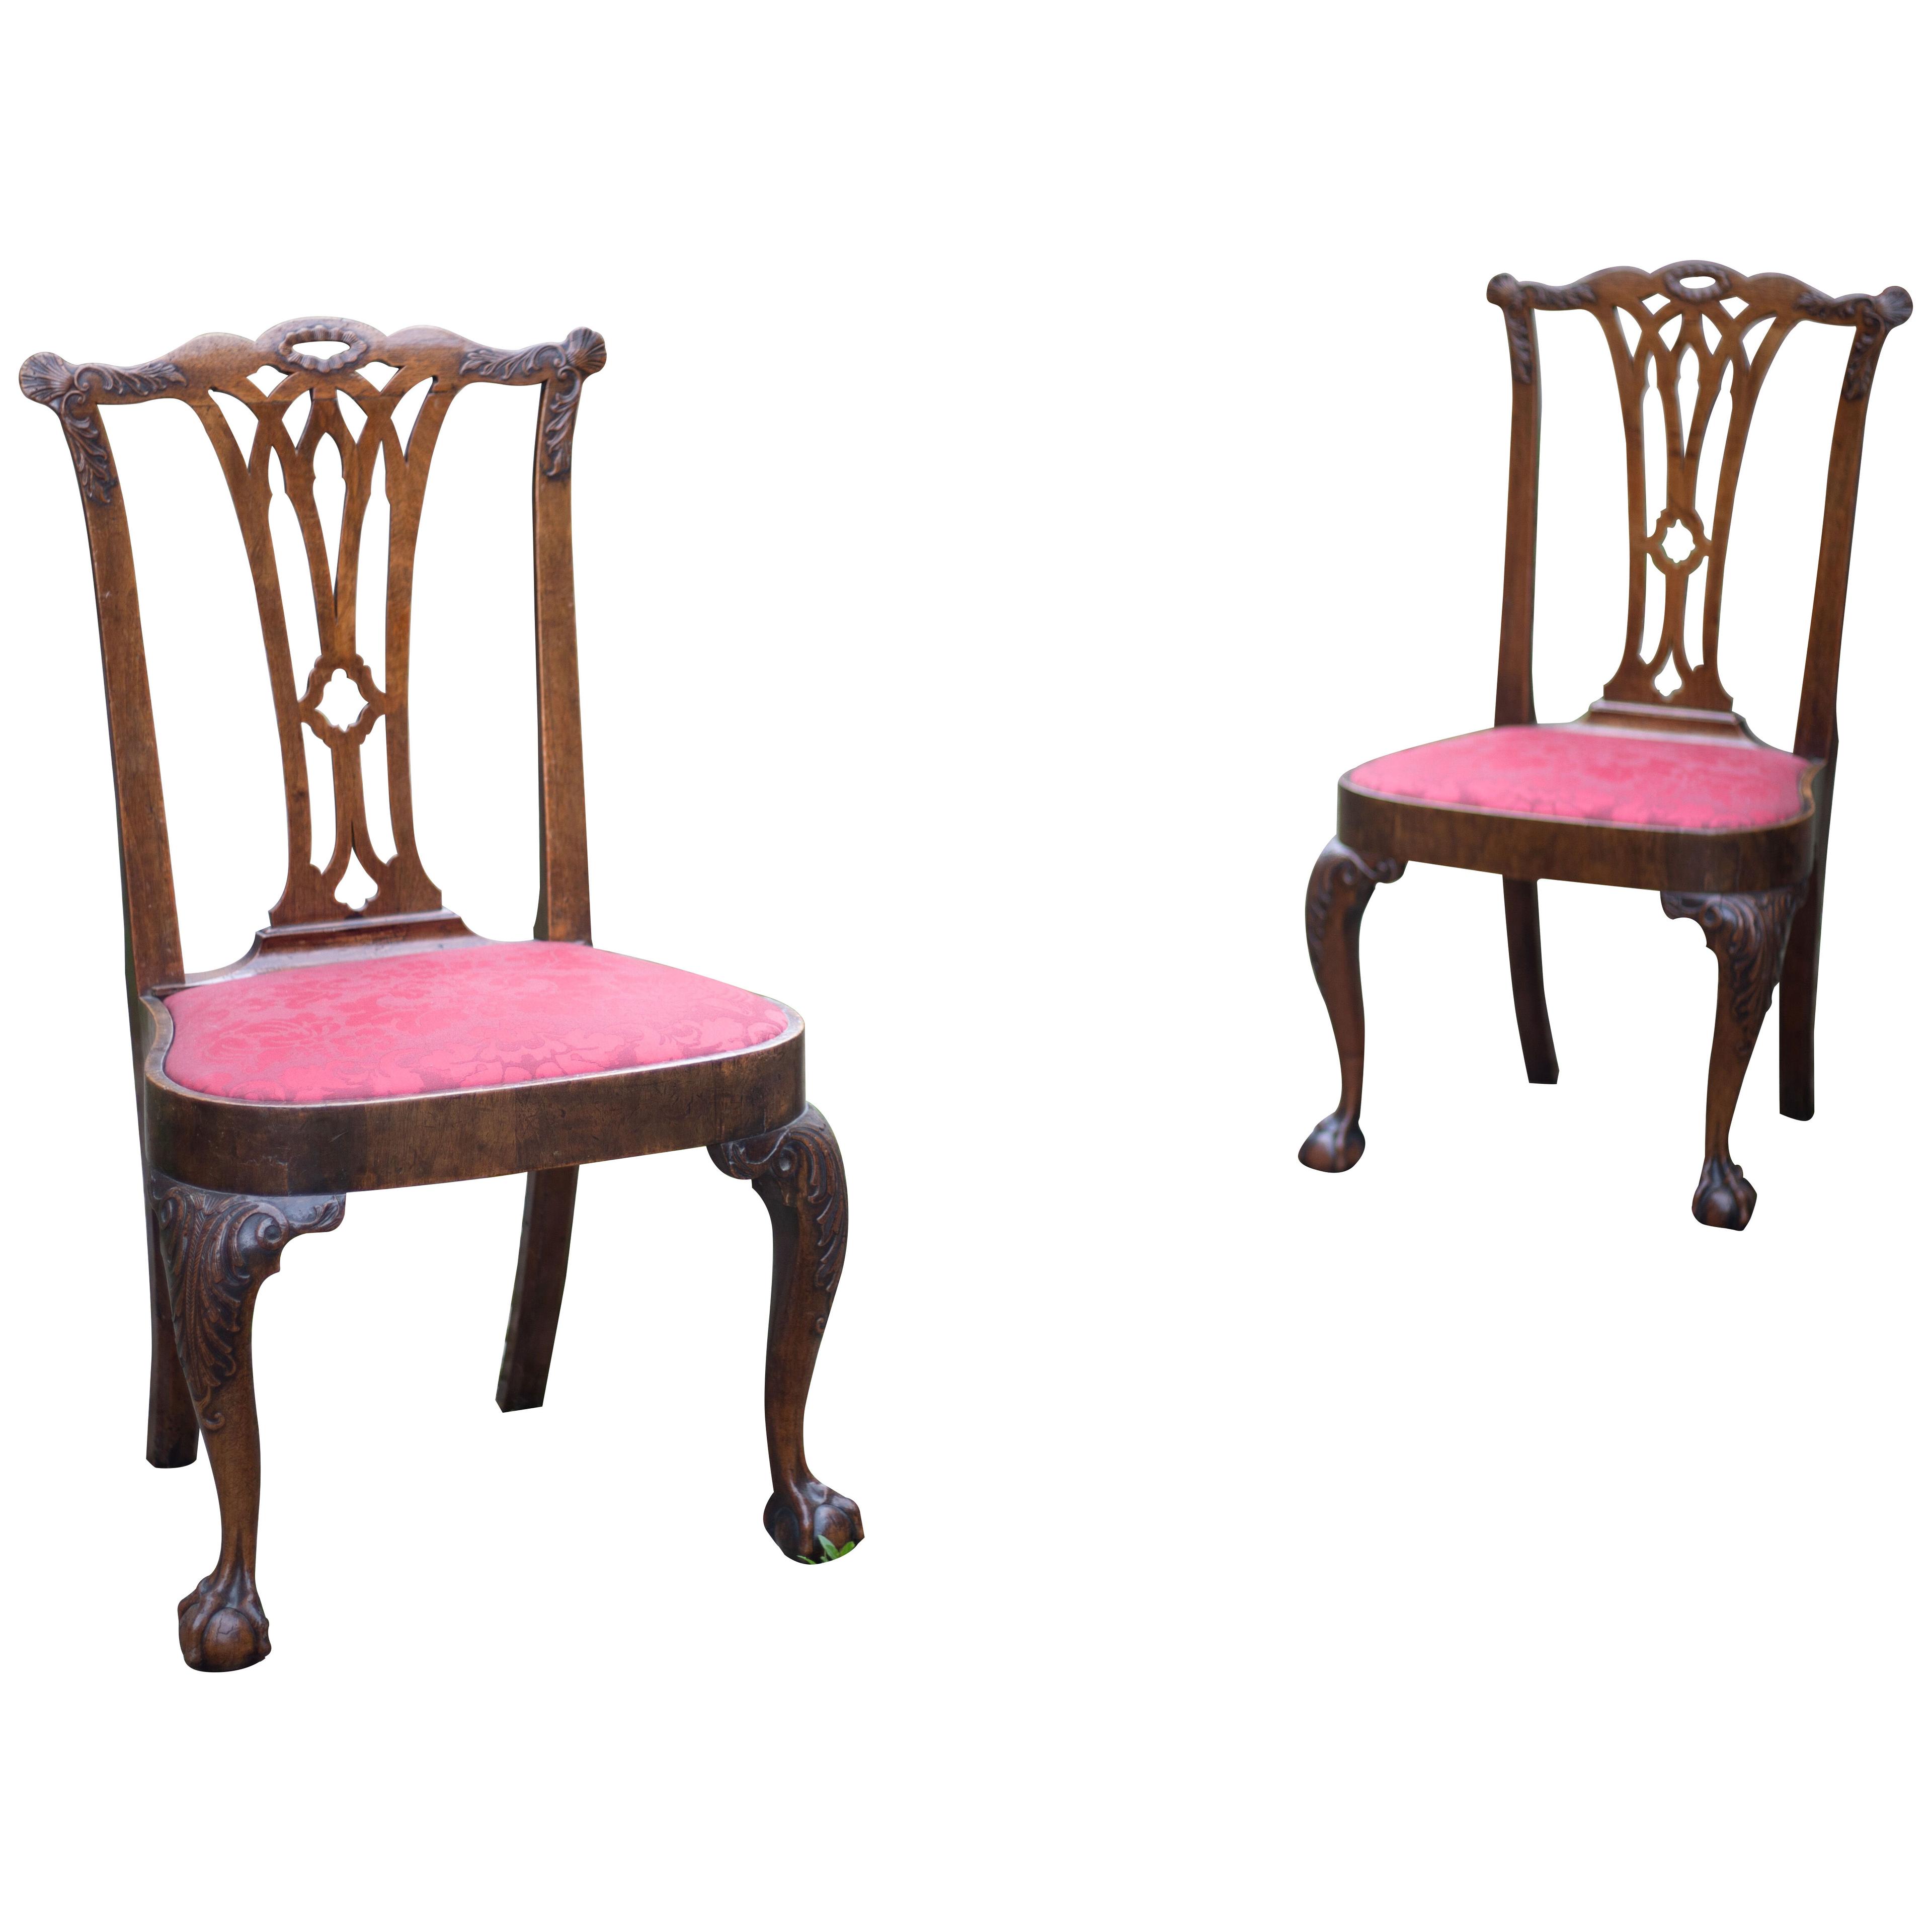 A Fine Pair of George II period walnut Side Chairs